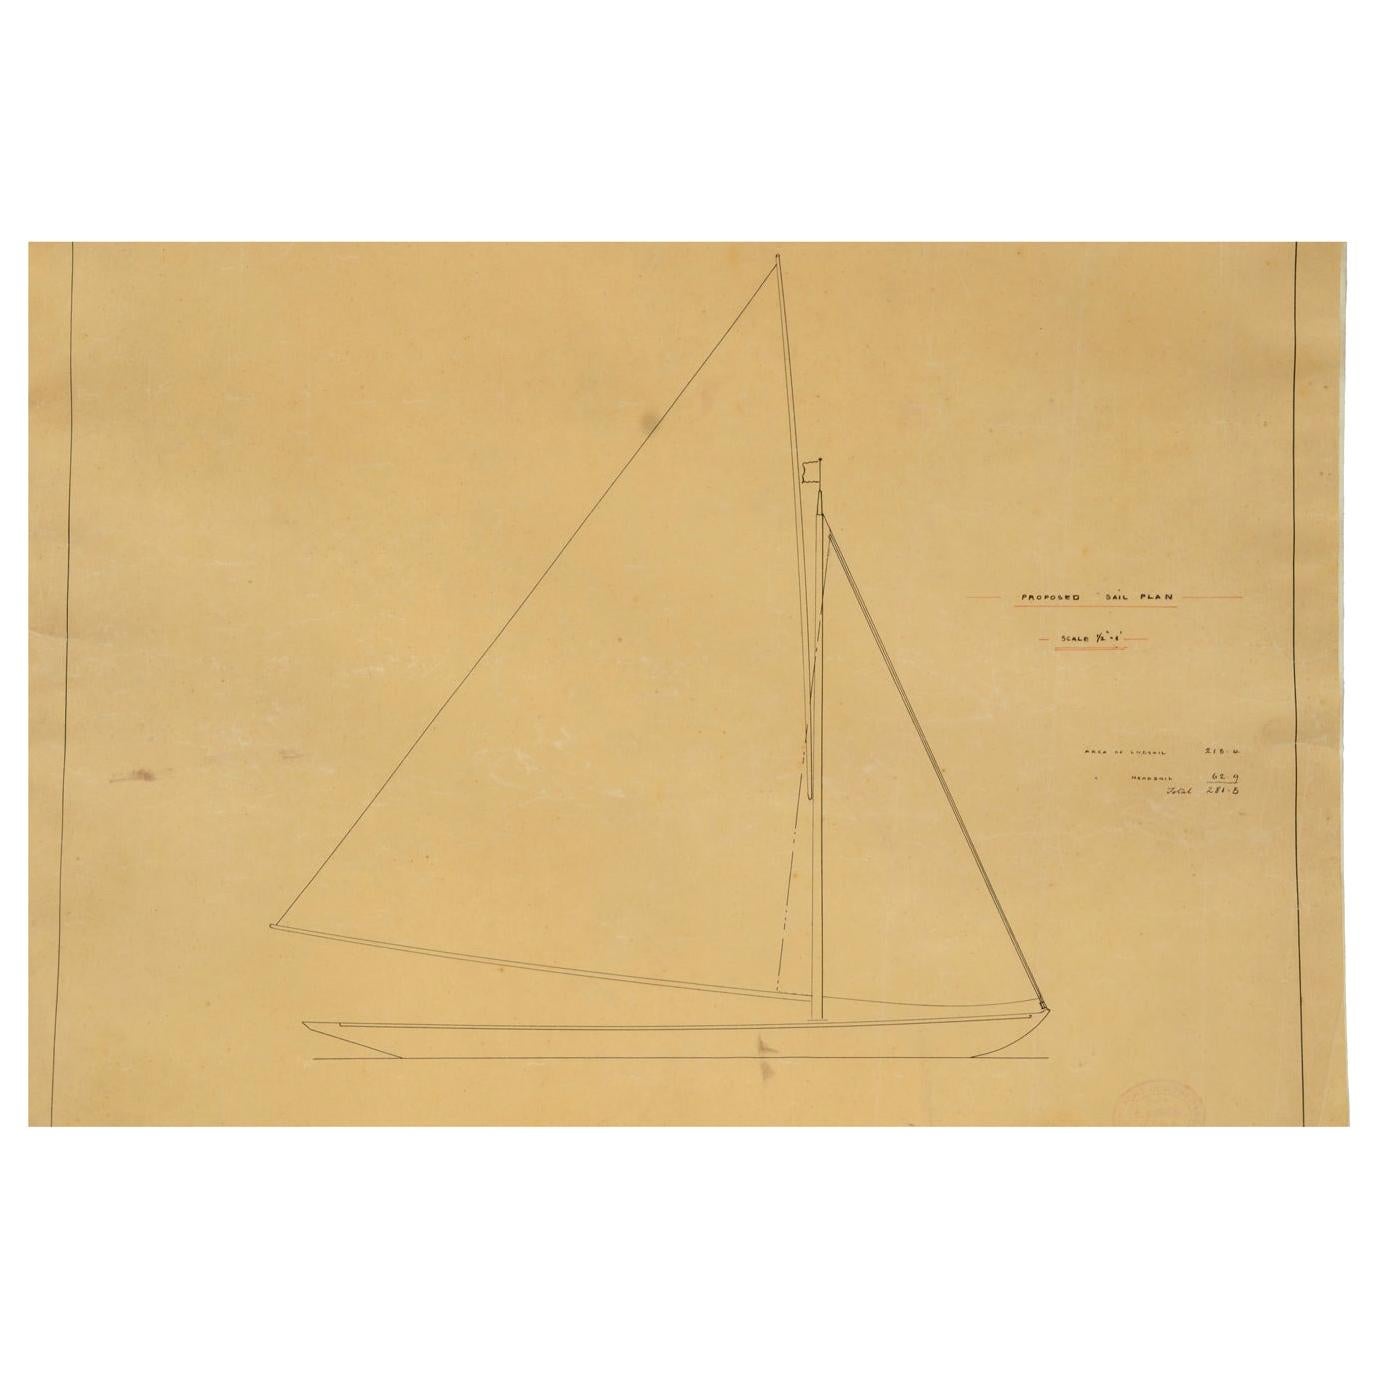 Project coming from the archives of Uffa Fox and never entered the commercial circuit depicting the sail plan of a boat by C. Sibbick. Measures: 57 x 46.5 (H) cm - 22.44 x 18.30 (H) inches. 

Charles Sibbick, born in England in 1849, began his